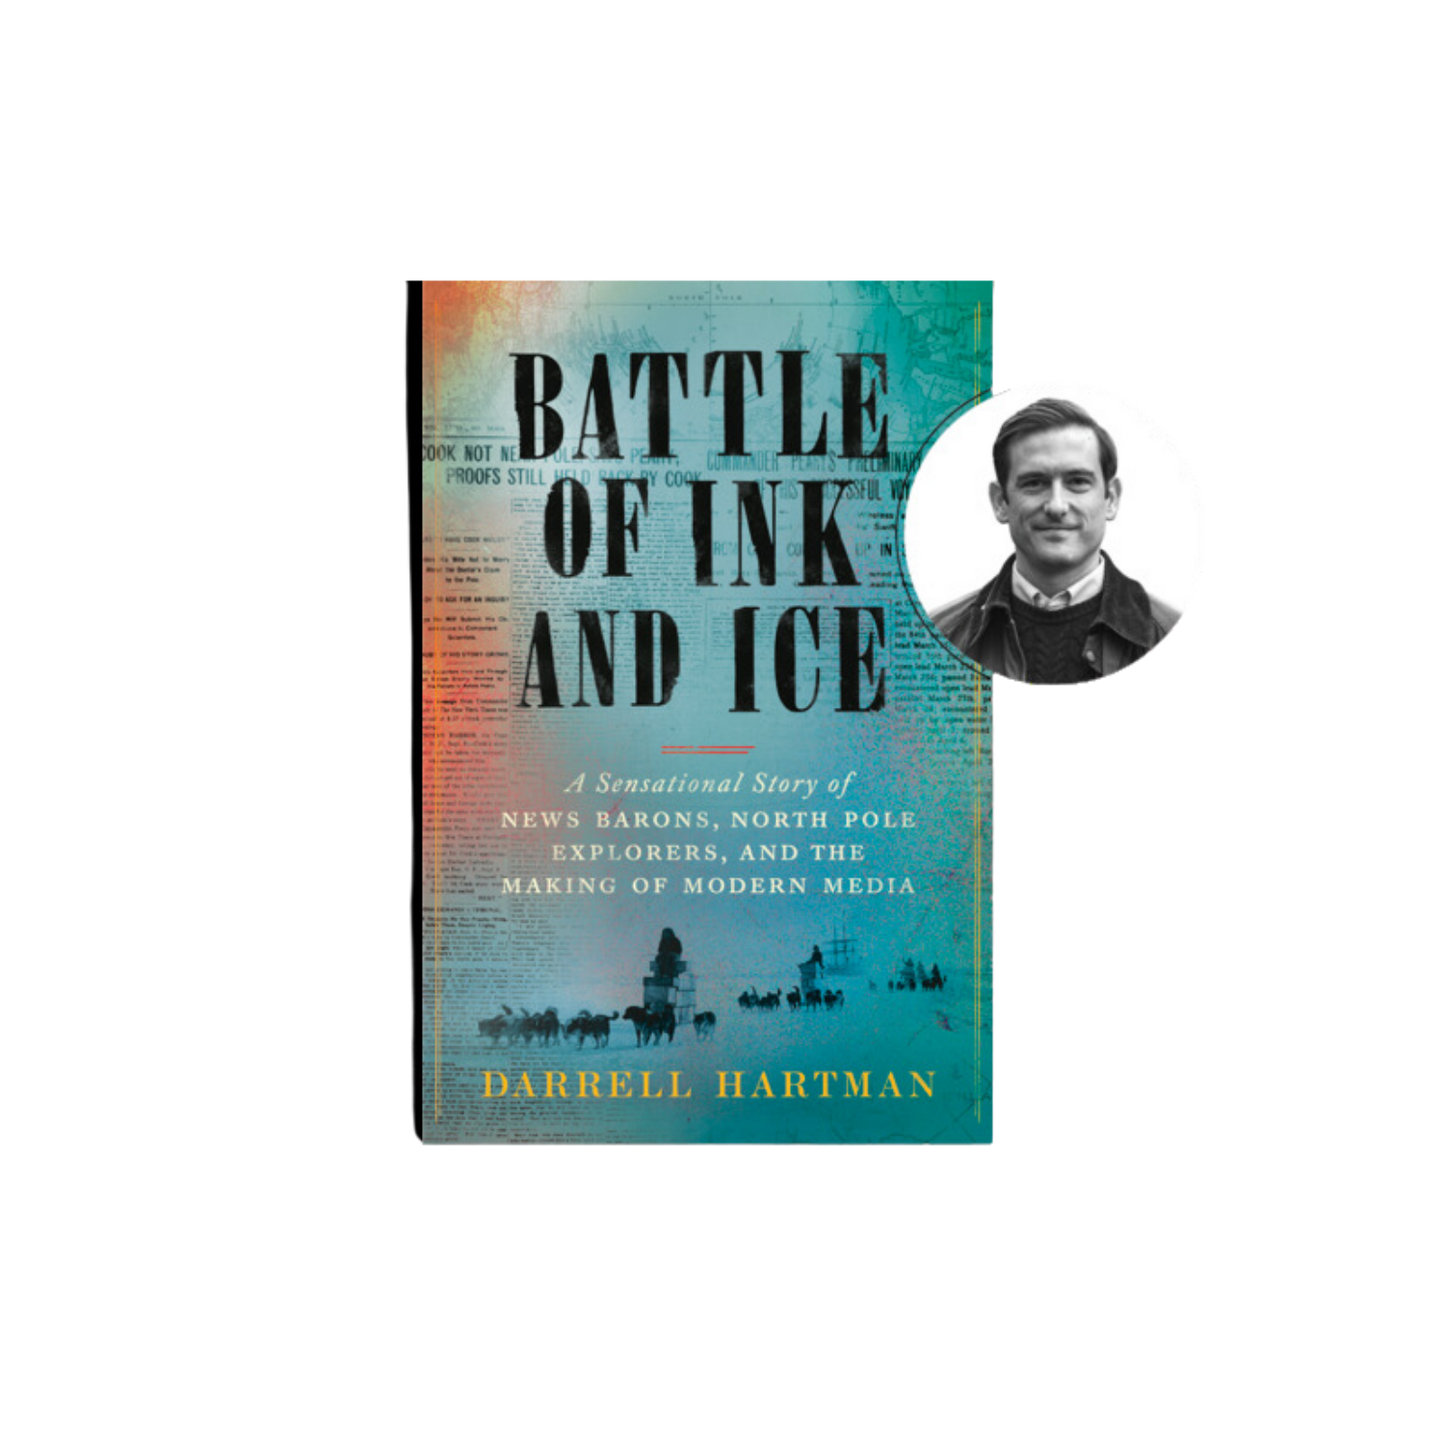 The Battle of Ink and Ice - Darrell Hartman